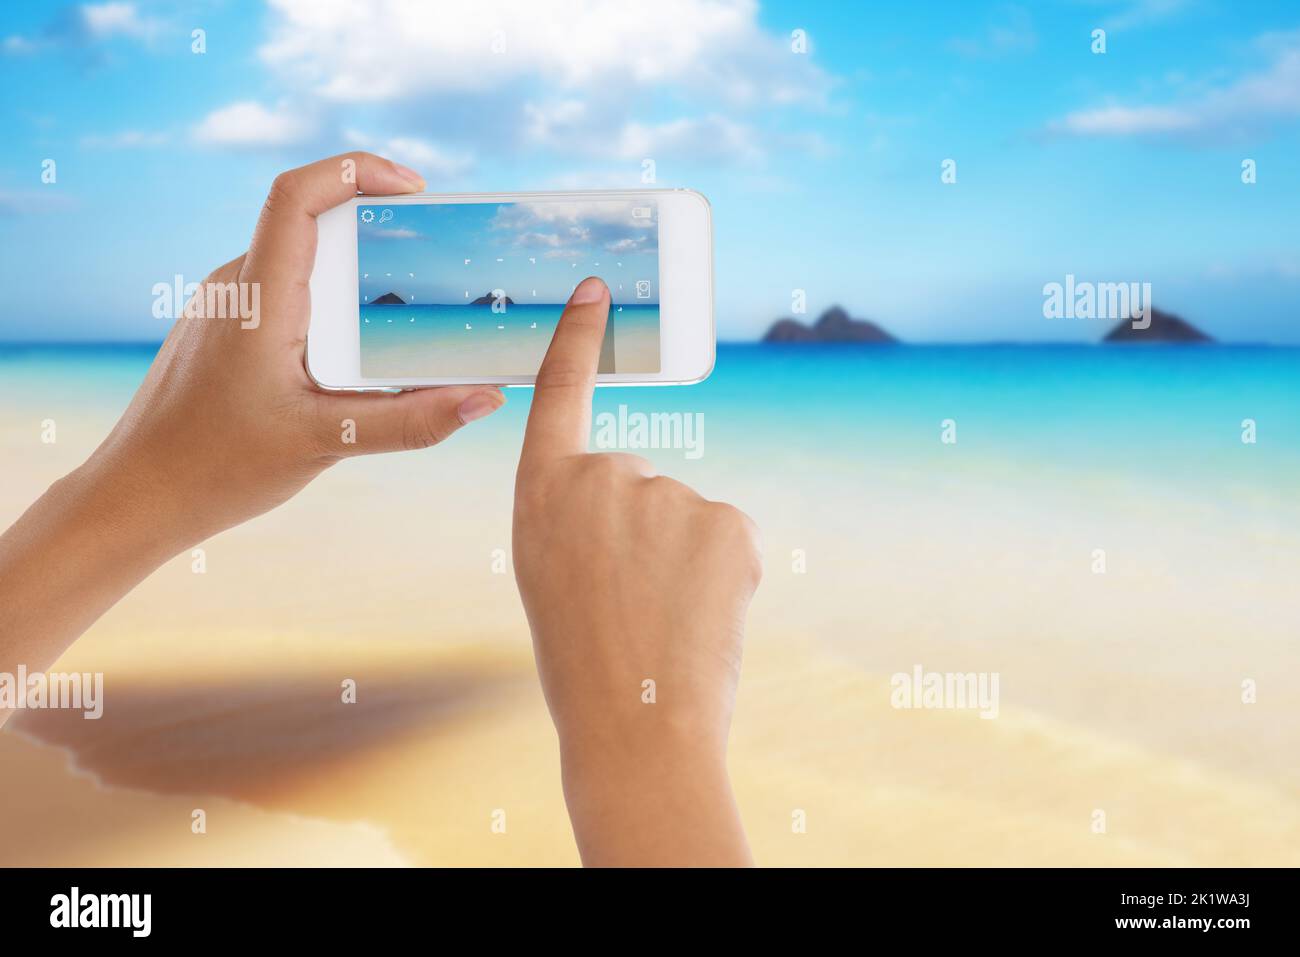 The perfect holiday destination. a woman taking a photo of a beautiful ocean view with her camera phone. Stock Photo